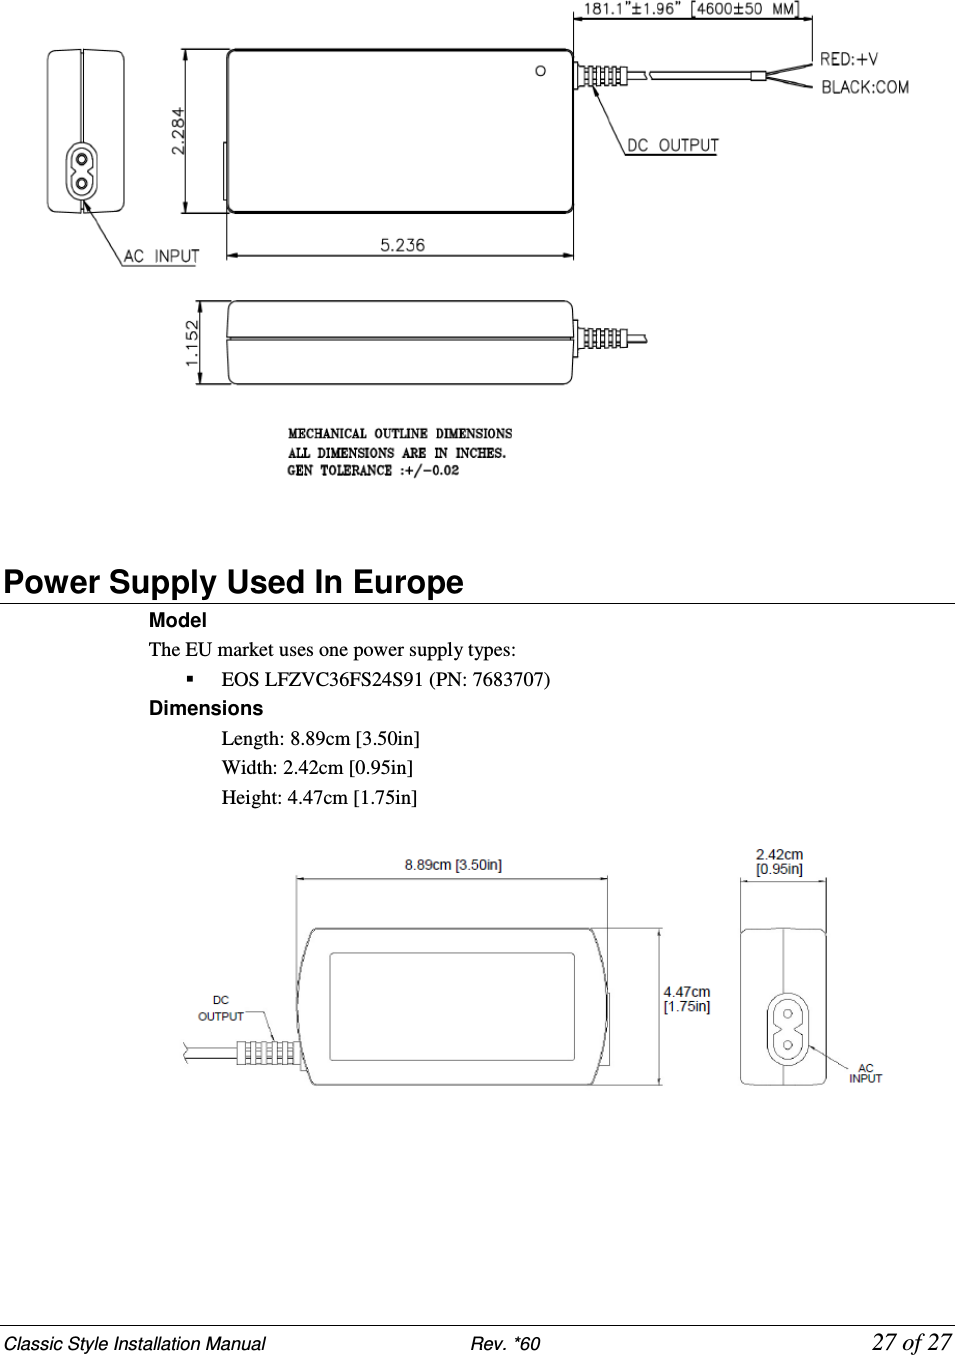 Classic Style Installation Manual                           Rev. *60           27 of 27  Power Supply Used In Europe Model The EU market uses one power supply types:  EOS LFZVC36FS24S91 (PN: 7683707) Dimensions Length: 8.89cm [3.50in]  Width: 2.42cm [0.95in]  Height: 4.47cm [1.75in]     